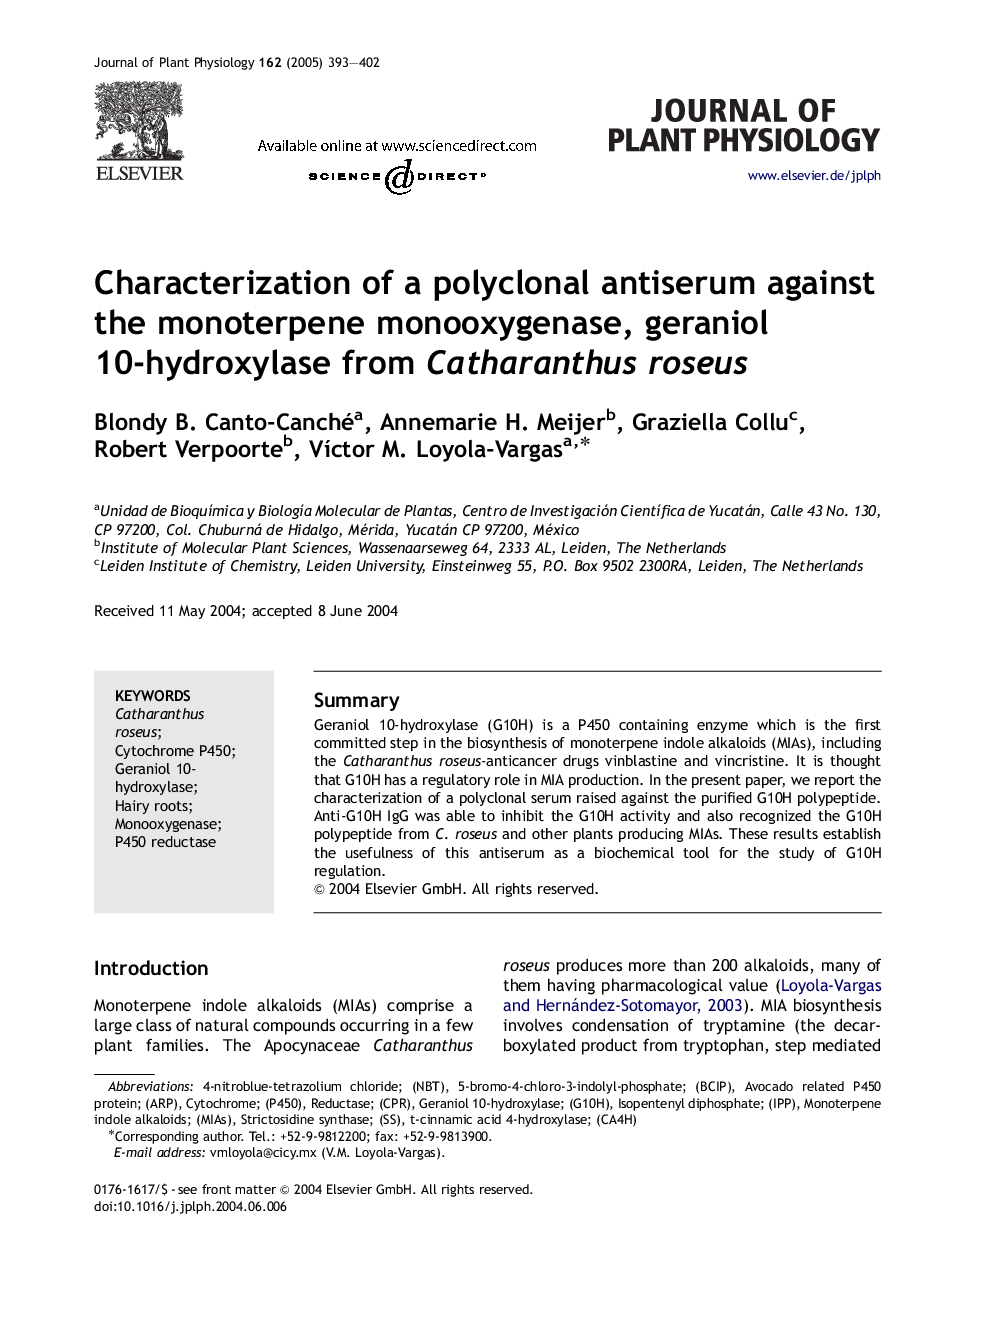 Characterization of a polyclonal antiserum against the monoterpene monooxygenase, geraniol 10-hydroxylase from Catharanthus roseus